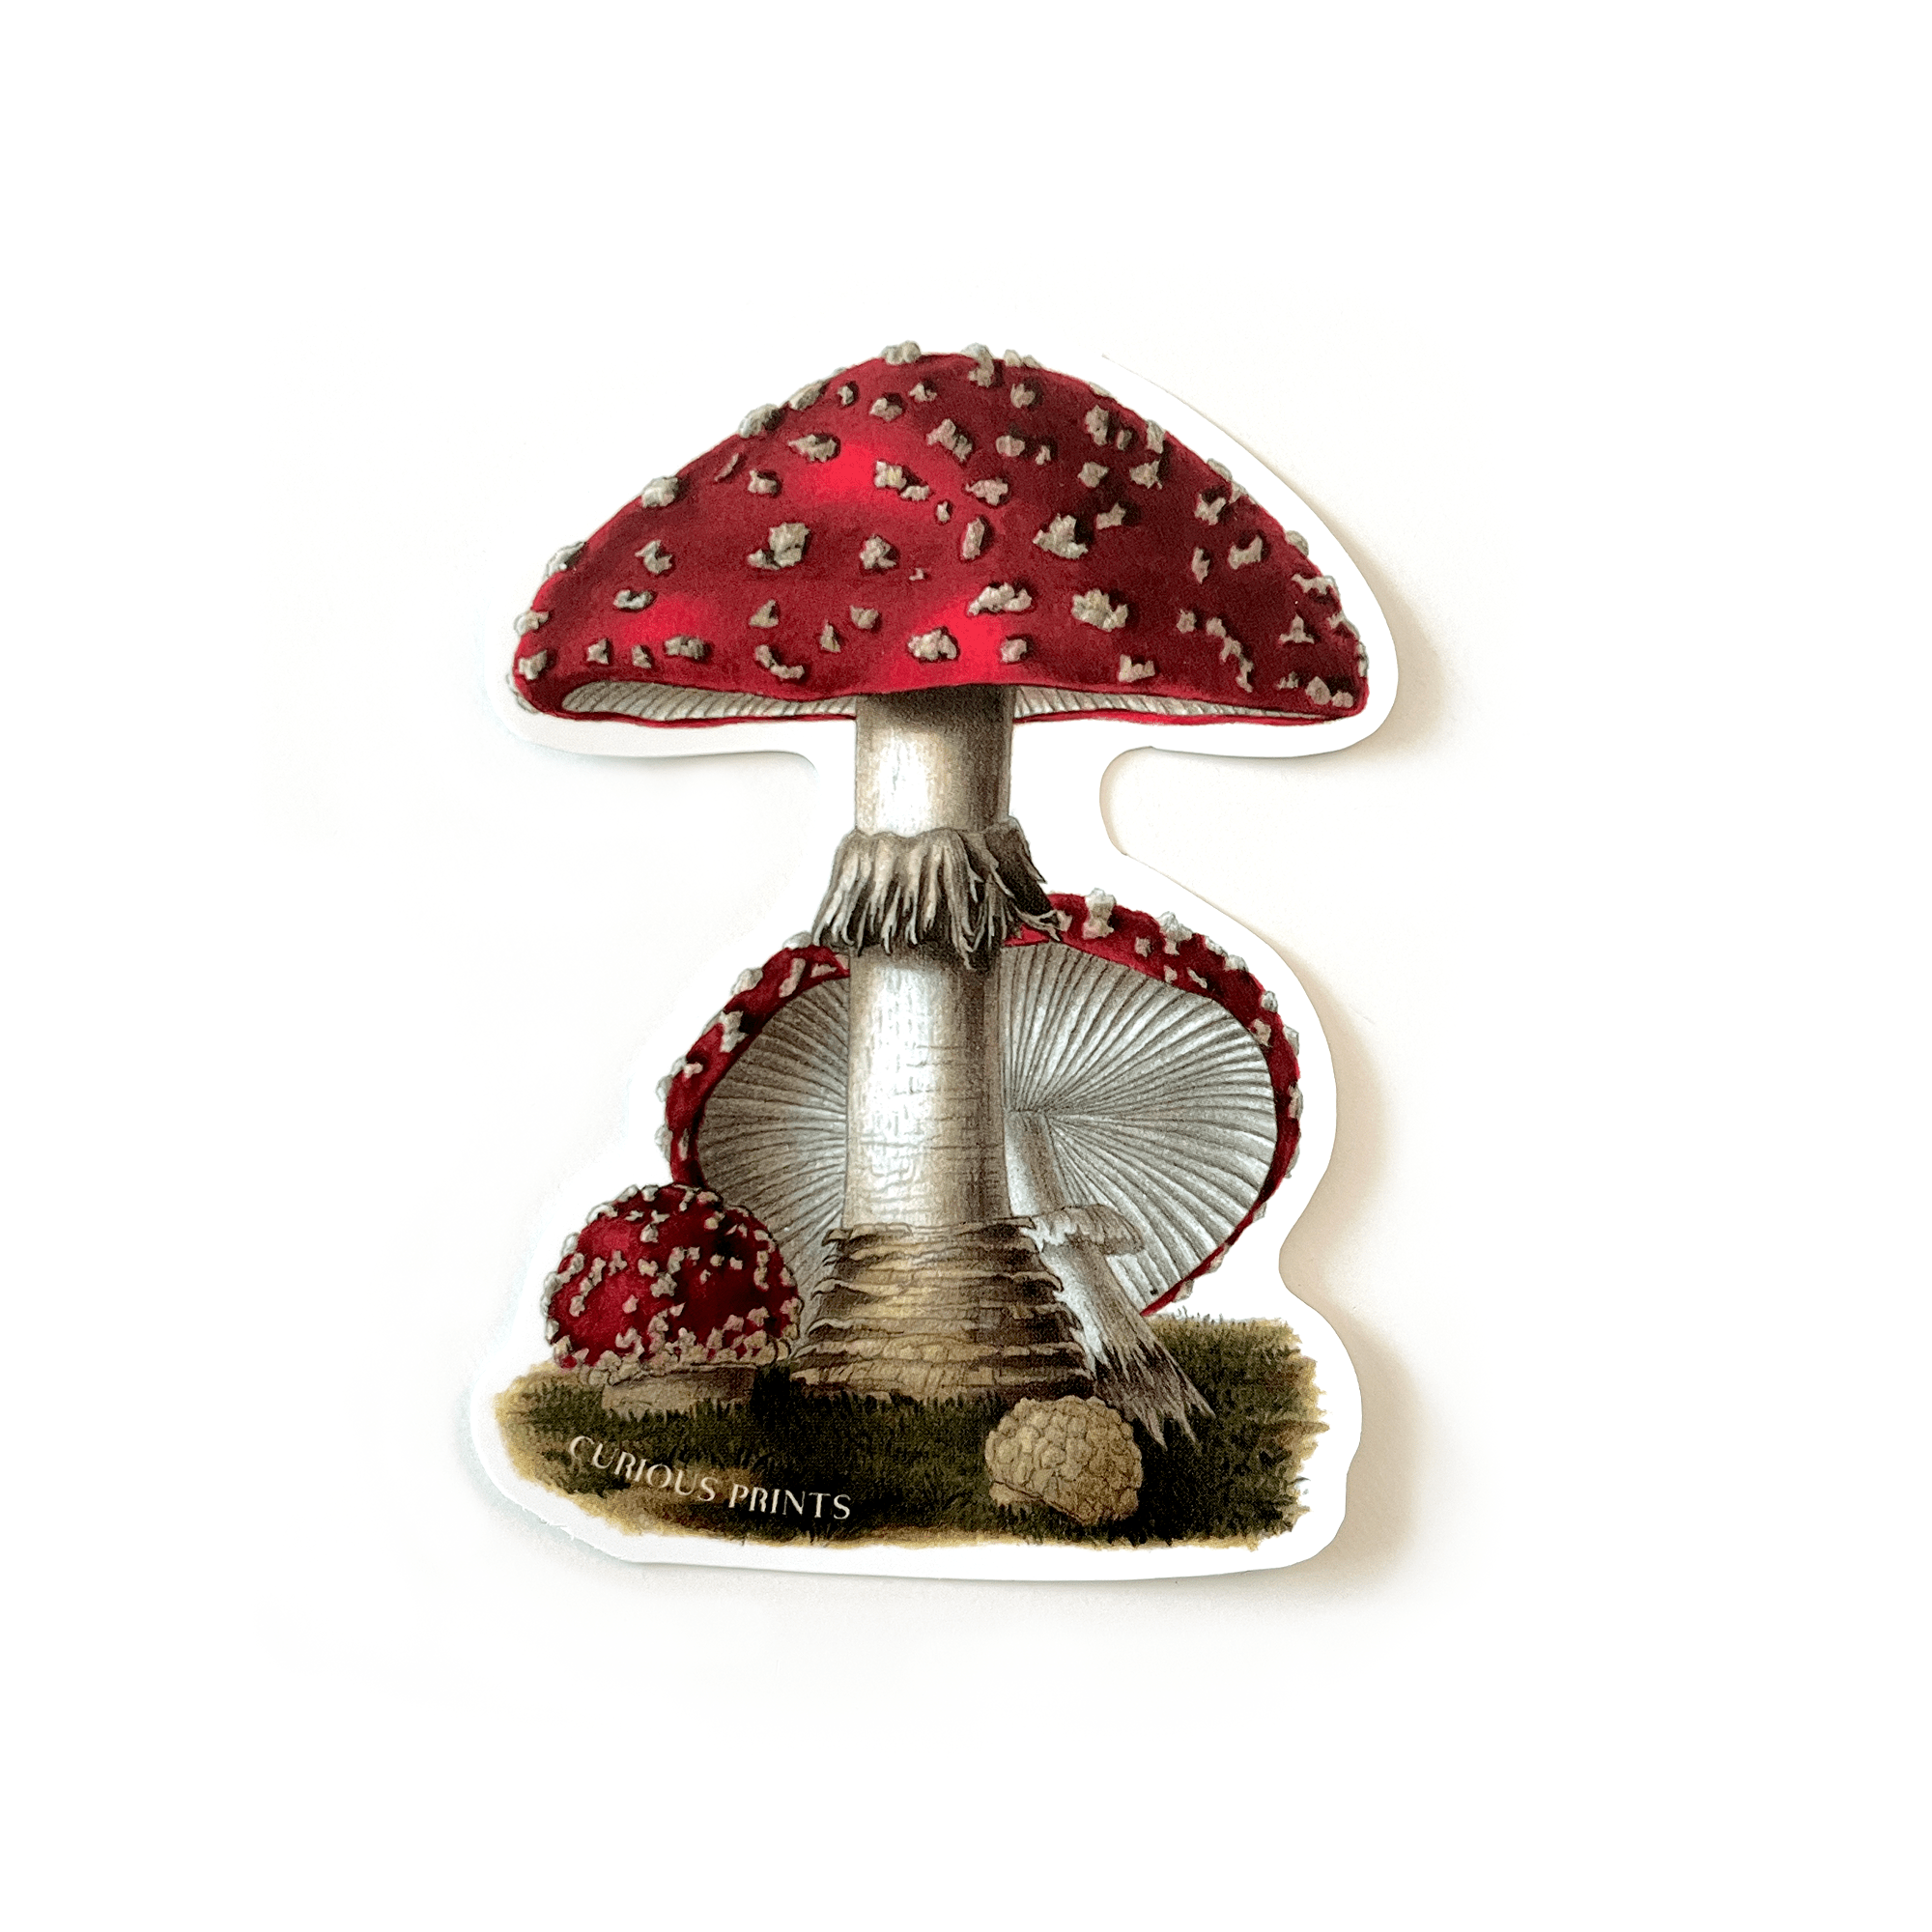 Vintage Magic Mushroom Waterproof Sticker - Out of the Blue